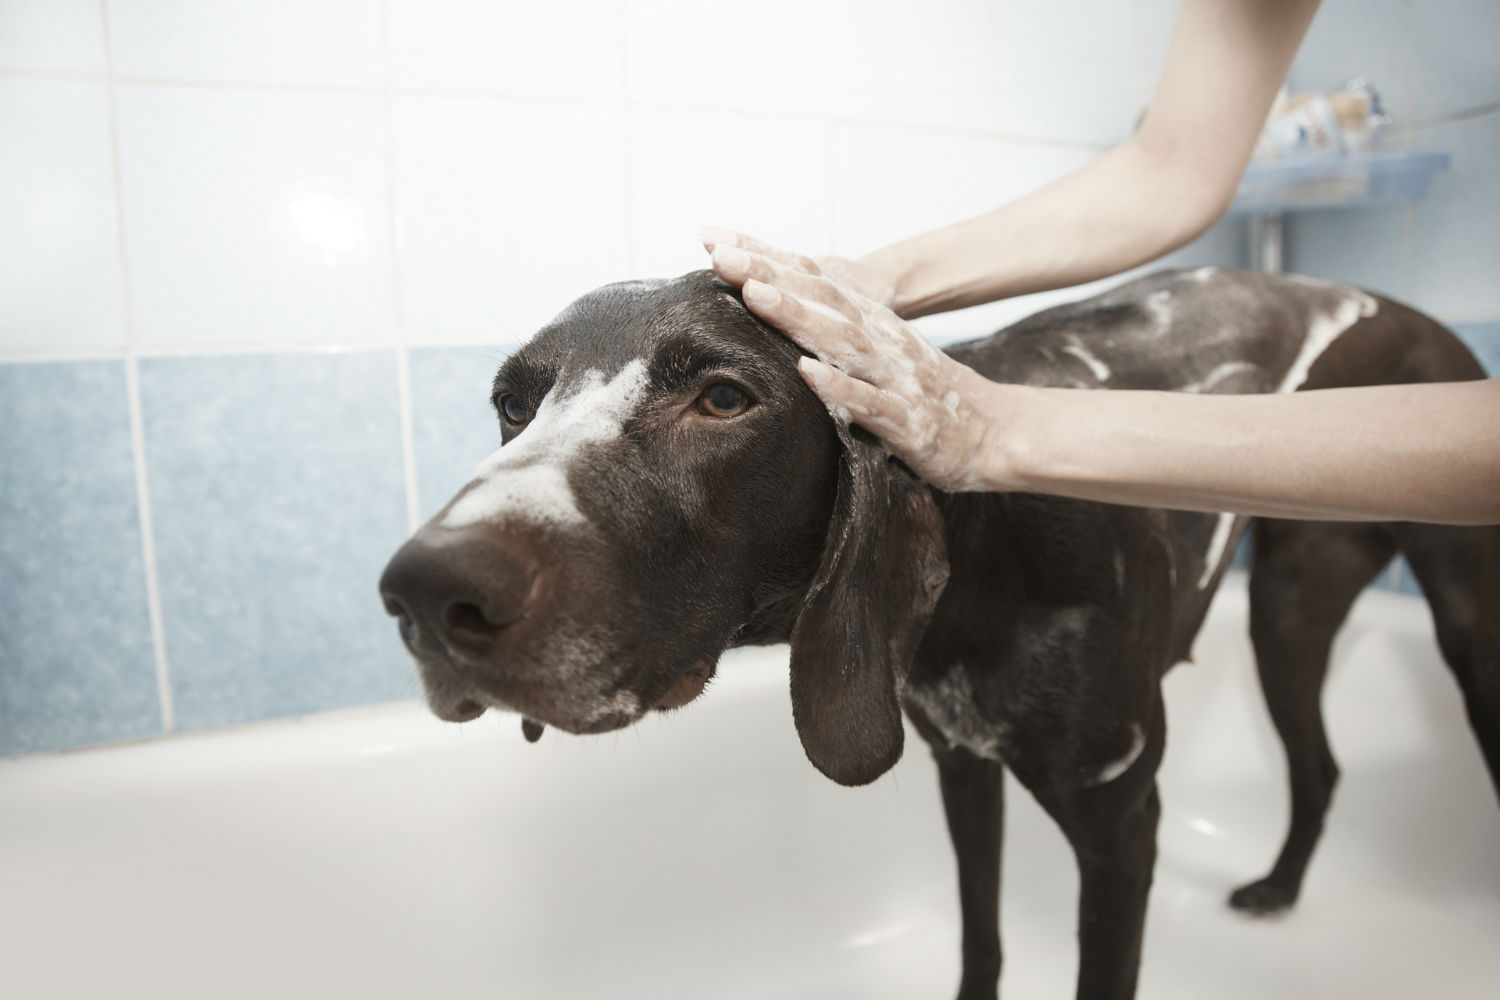 Dog being groomed- Personal safety for mobile groomers